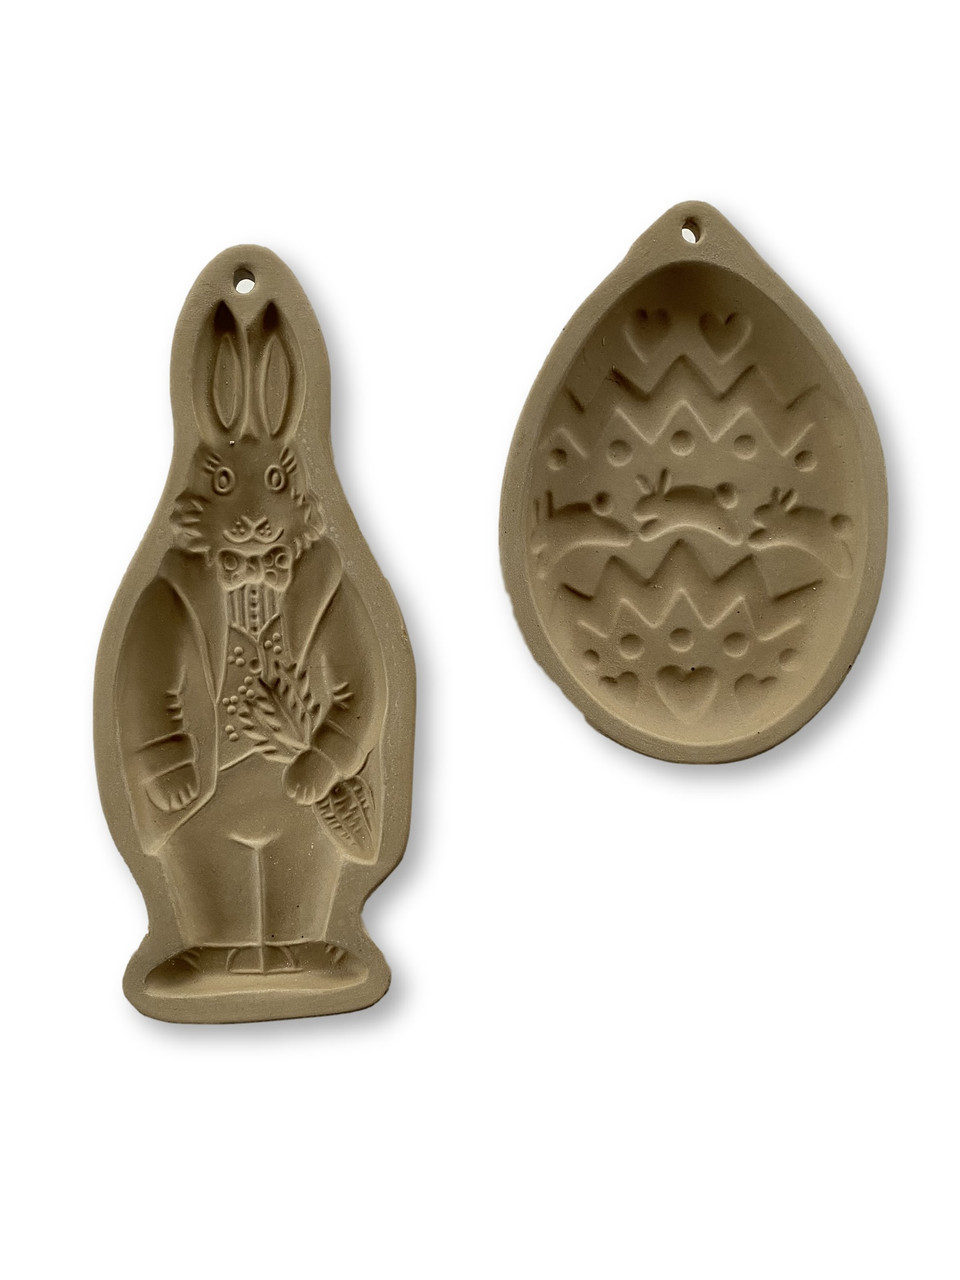 https://cdn10.bigcommerce.com/s-snw7b9h1/products/438/images/1382/Vintage_Easter_Brown_Bag_Cookie_Molds_1988__83201.1585524057.1280.1280.jpg?c=2